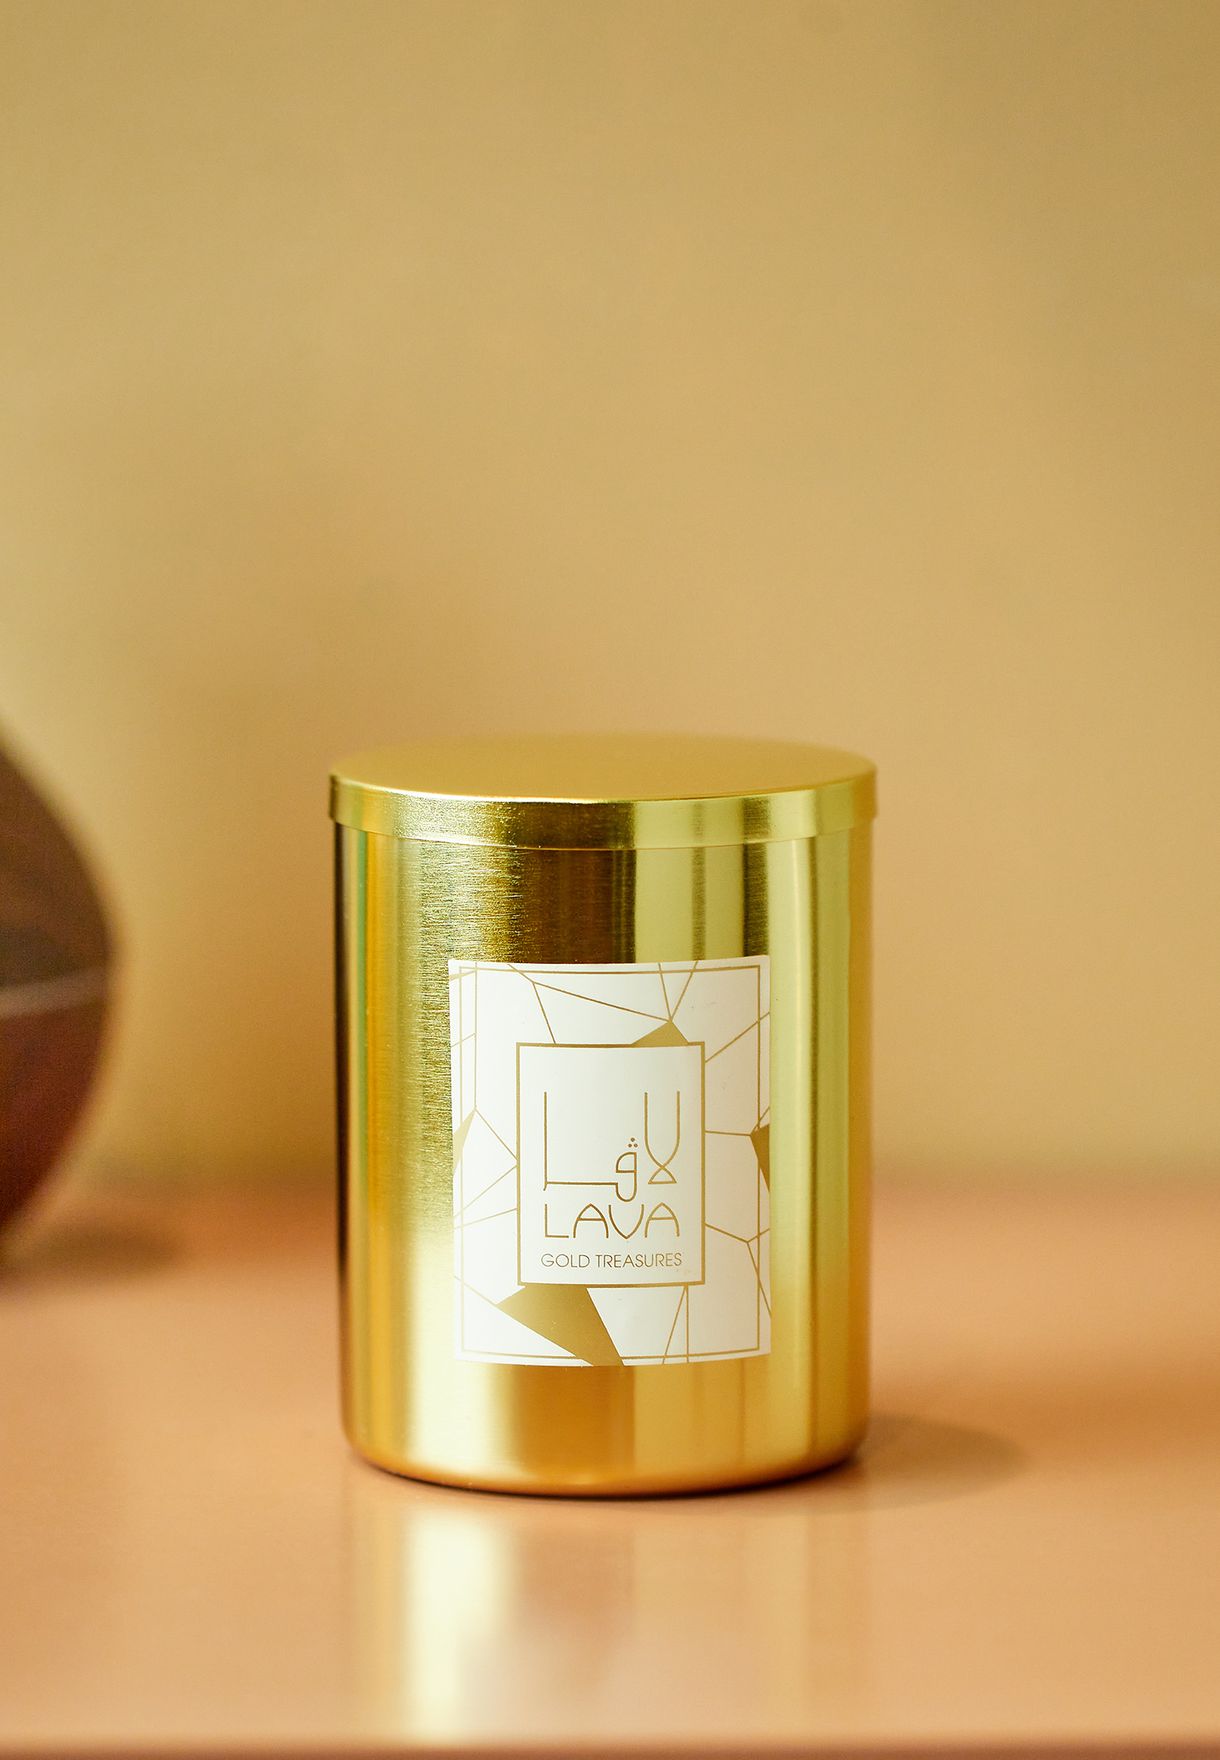 Gold Treasures Candle